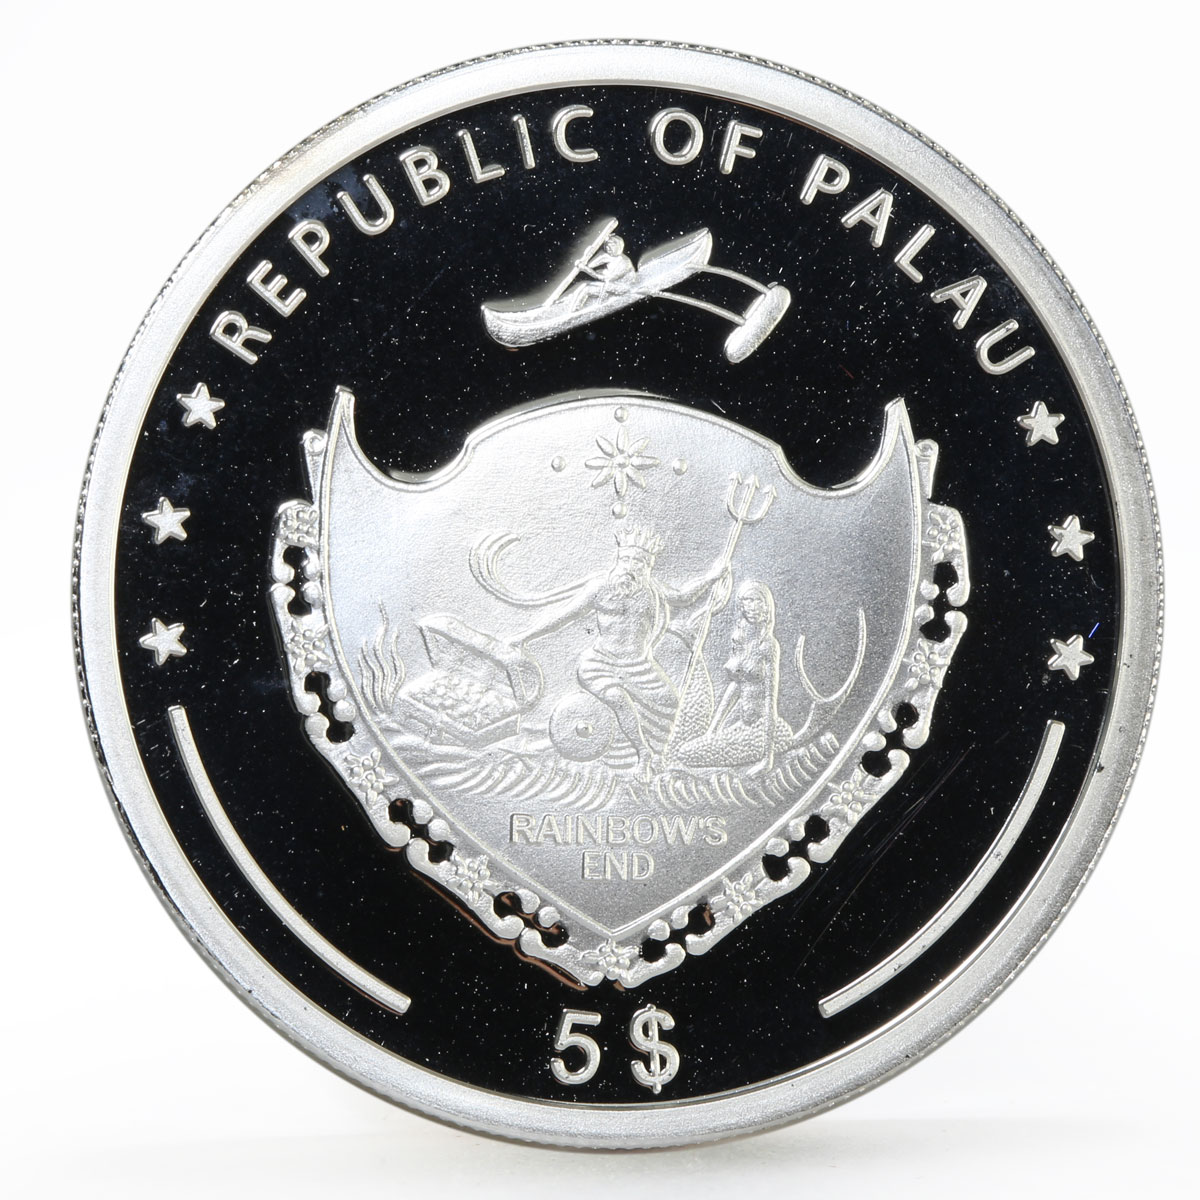 Details about   Palau 2014 Berlin Wall 5 Dollars Colour Silver Coin,Proof